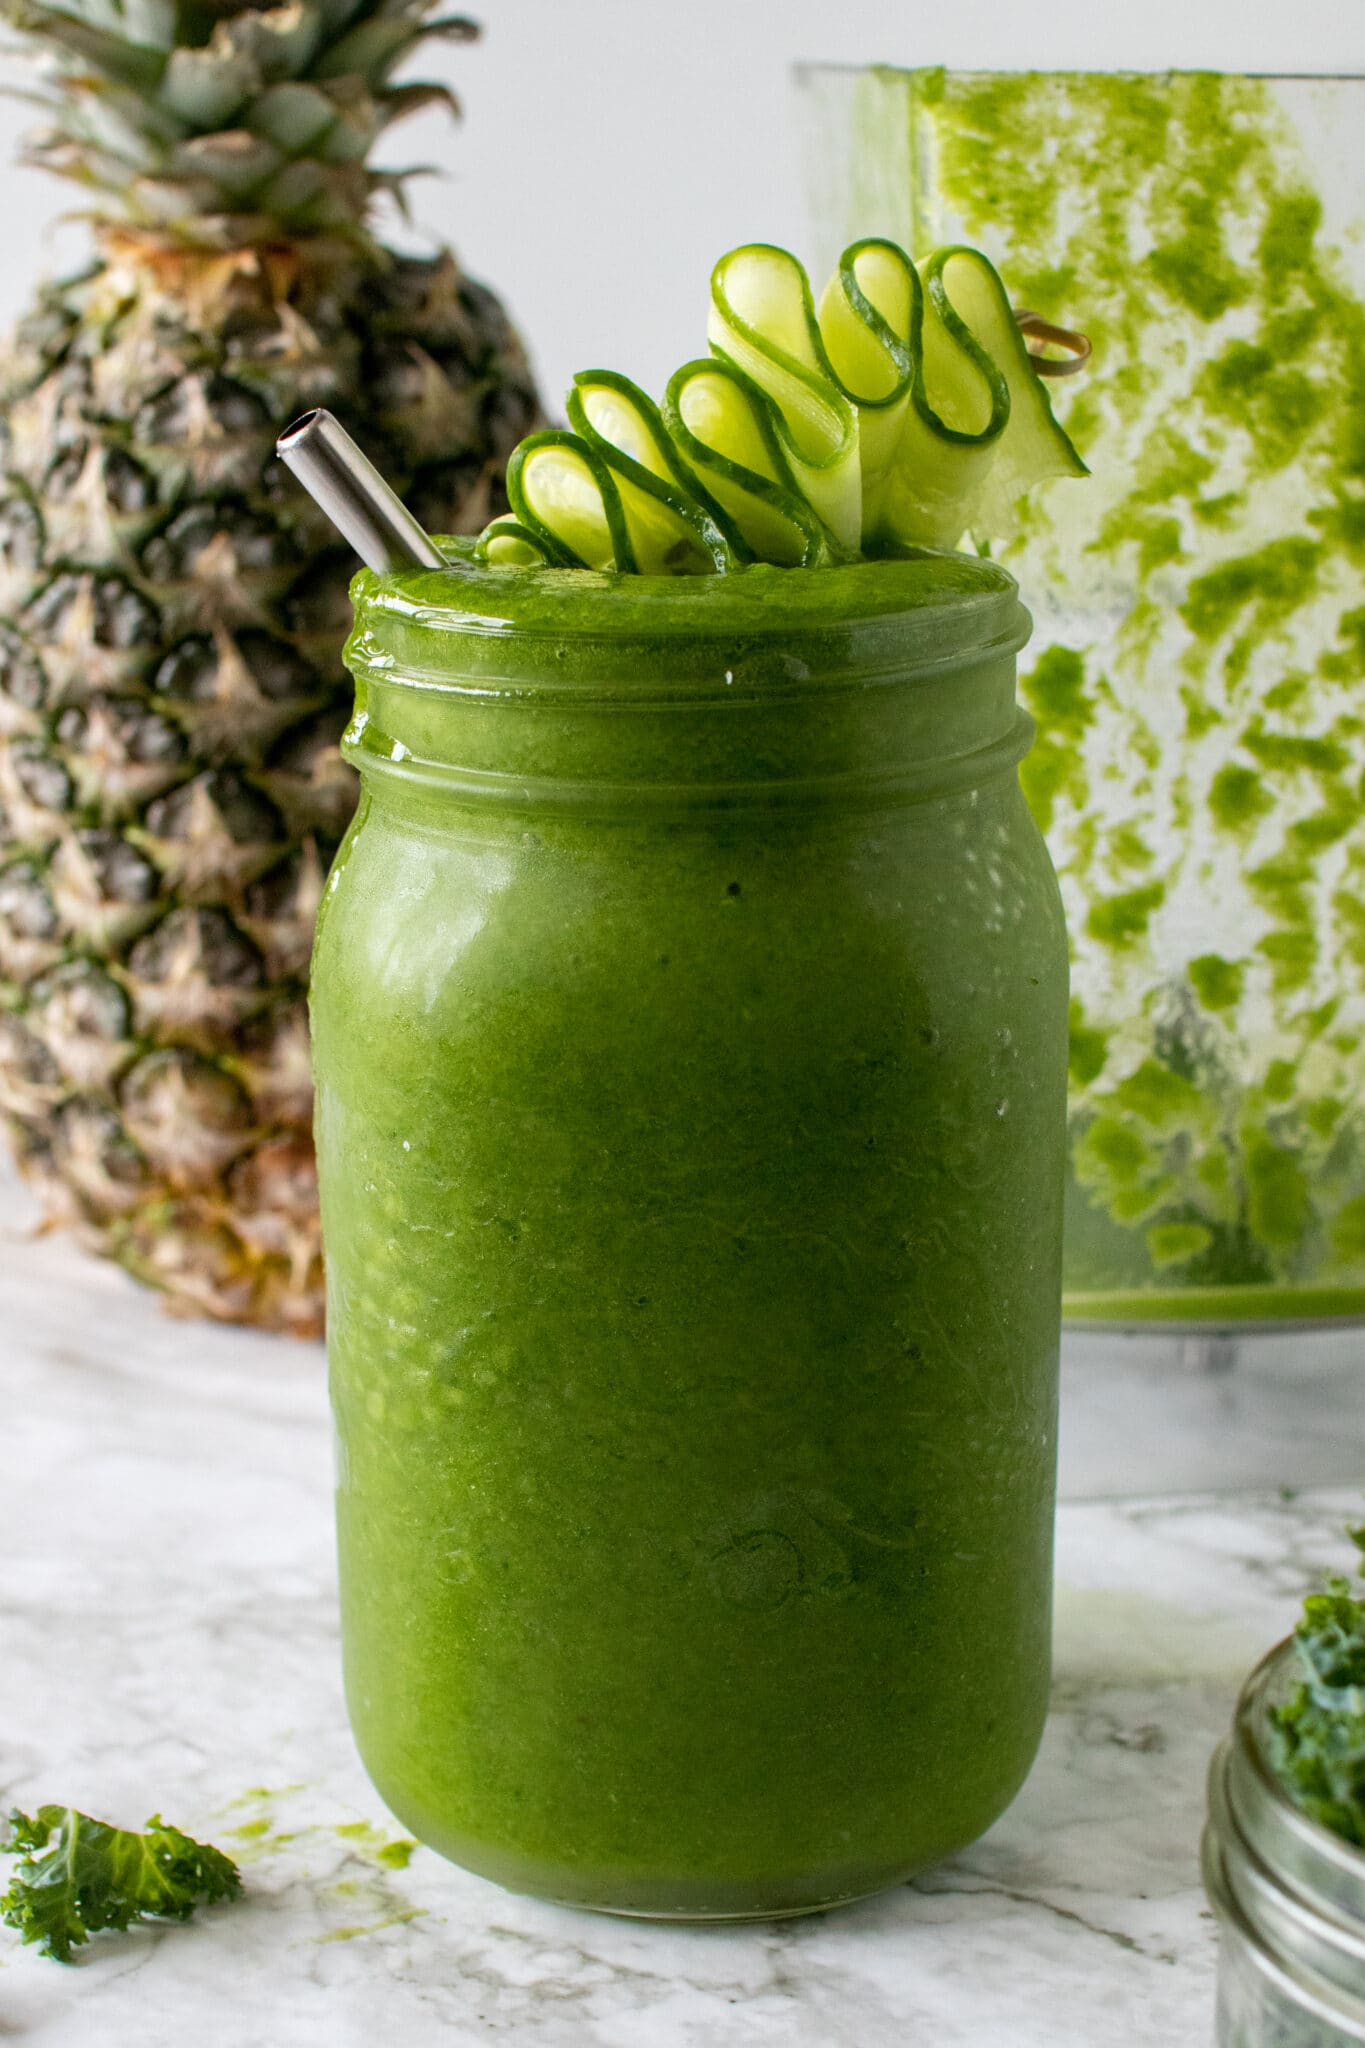 Delicious Pineapple Ginger Kale Smoothie – The Travel Bite